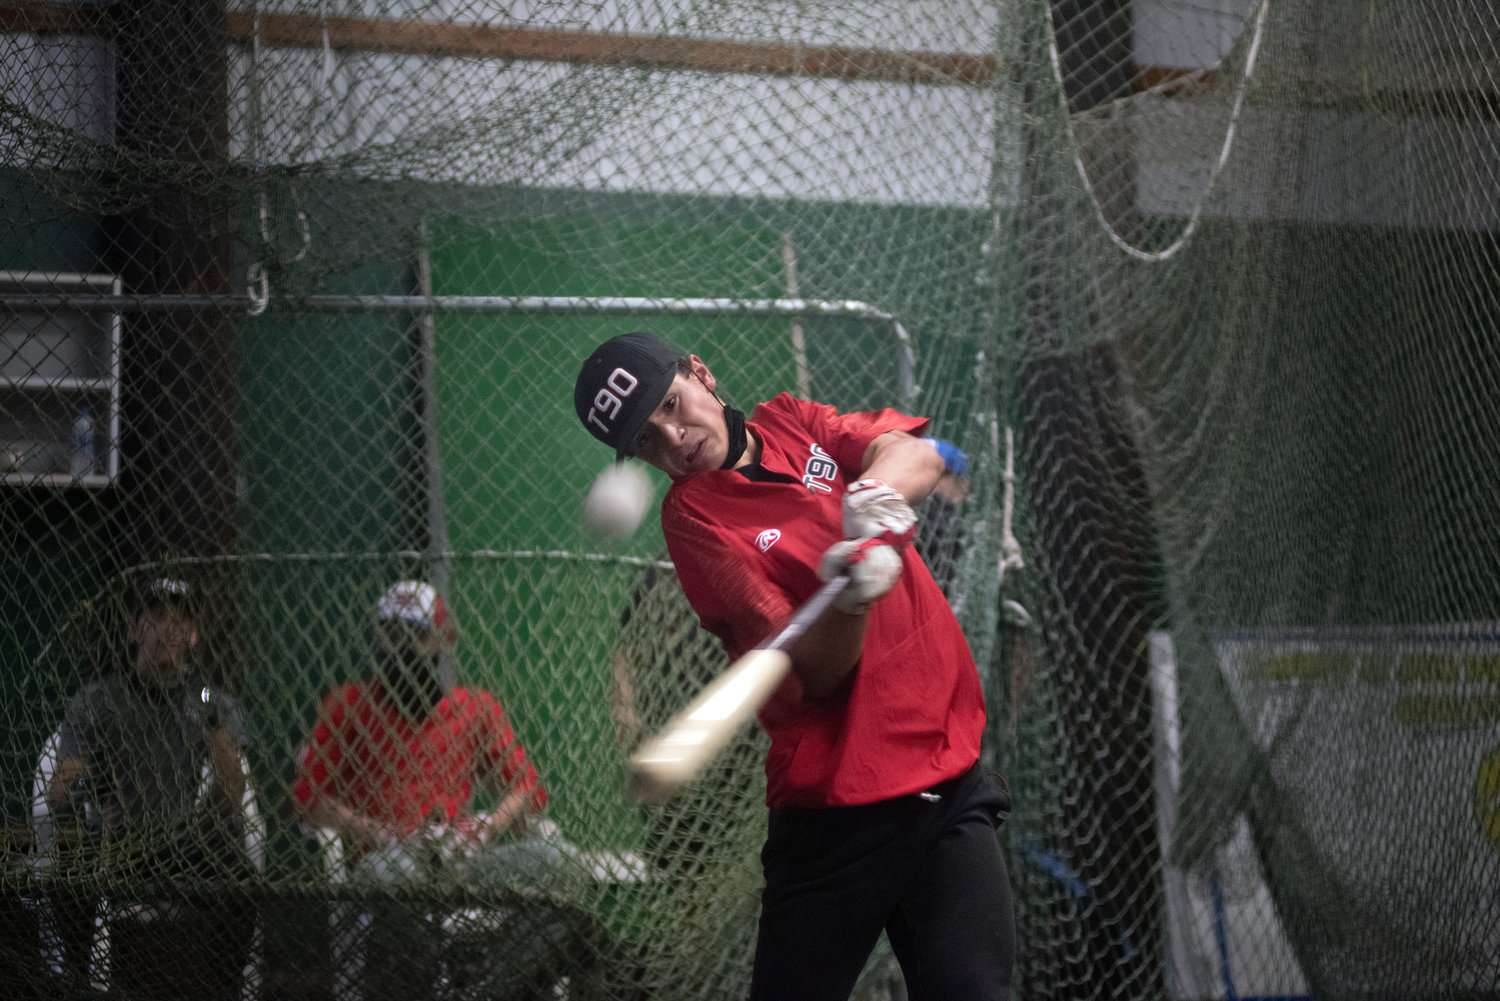 Tenino sophomore Easton Snider takes a cut at the batting cage on Nov. 4.